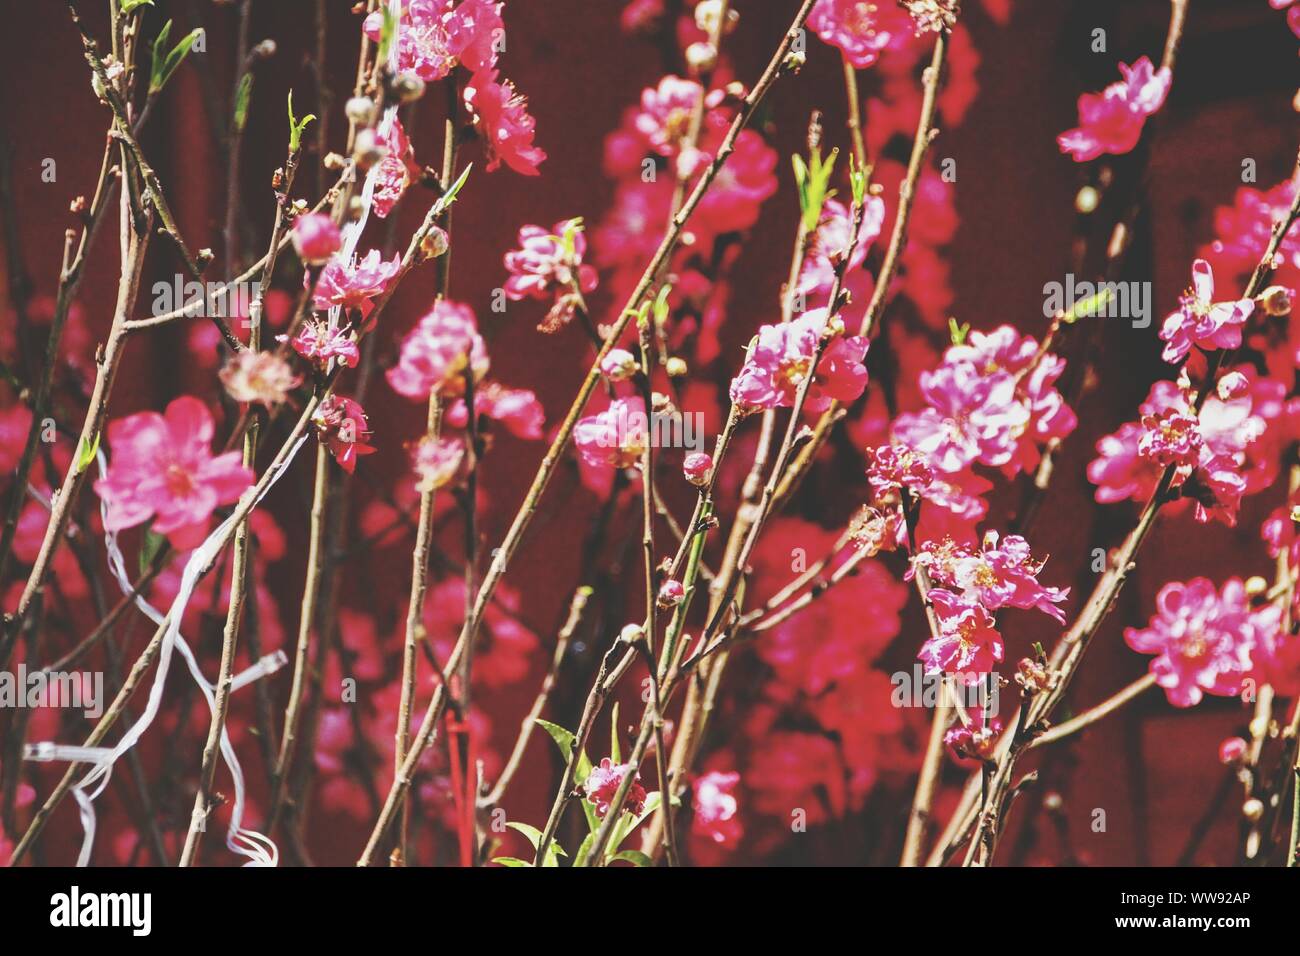 Cherry tree with flowers against red background as decoration during Vietnamese New Year (Tet) and Mid-Autumn Festival Stock Photo